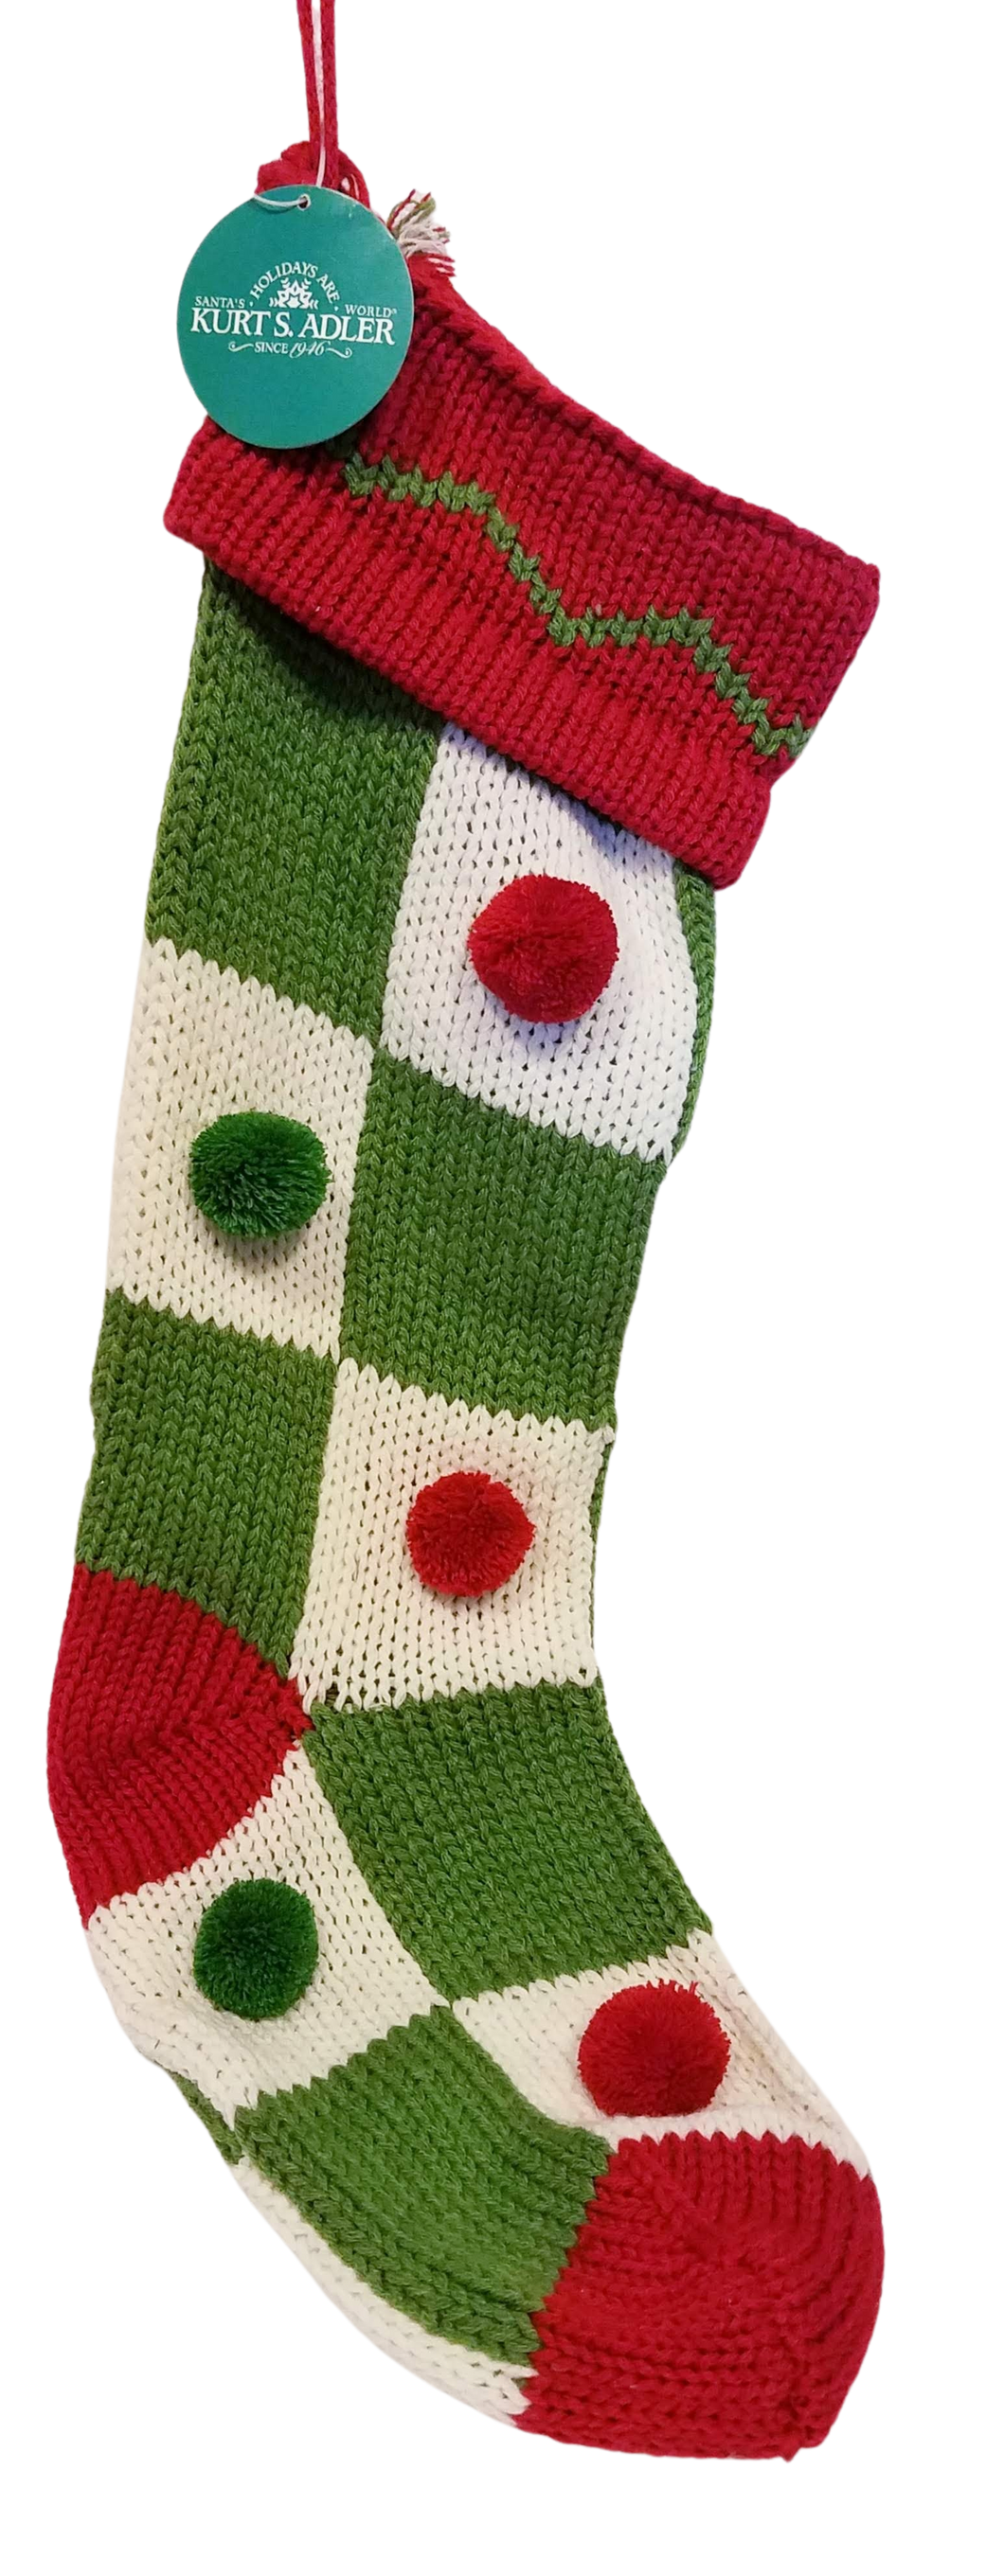 Red/Green/White Knitted Stockings 20